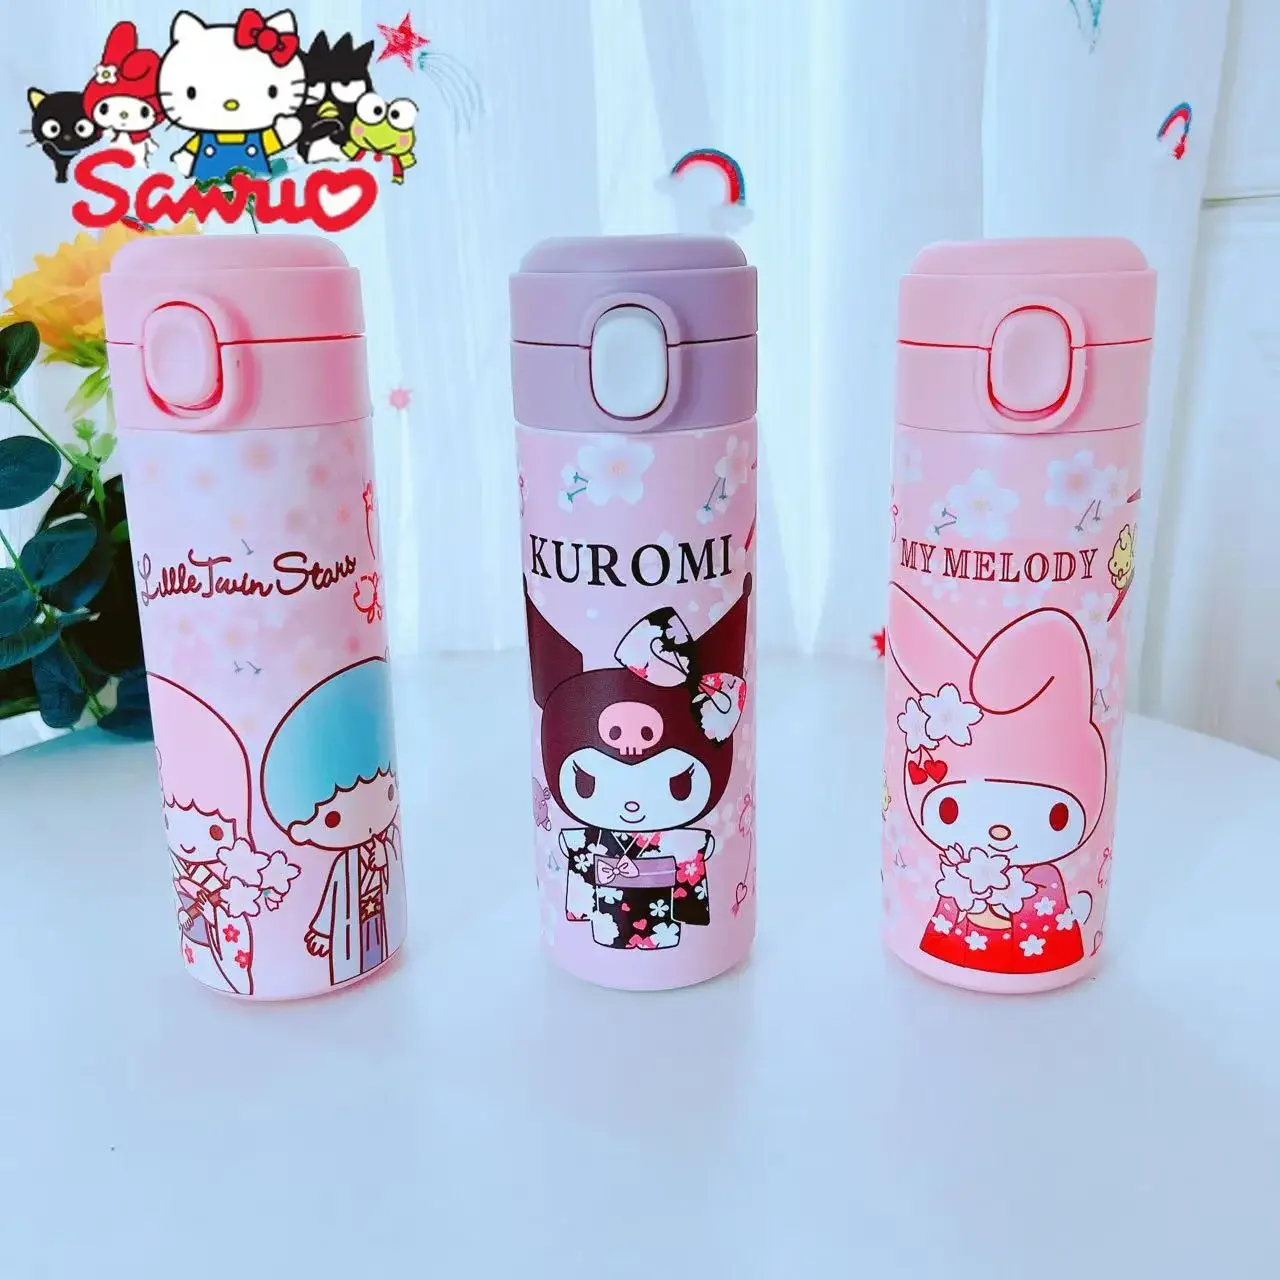 

Sanrio Melody Kuromi Hello Kitty Cinnamoroll Pochacco 304 stainless steel water bottle student portable thermos bouncing cup